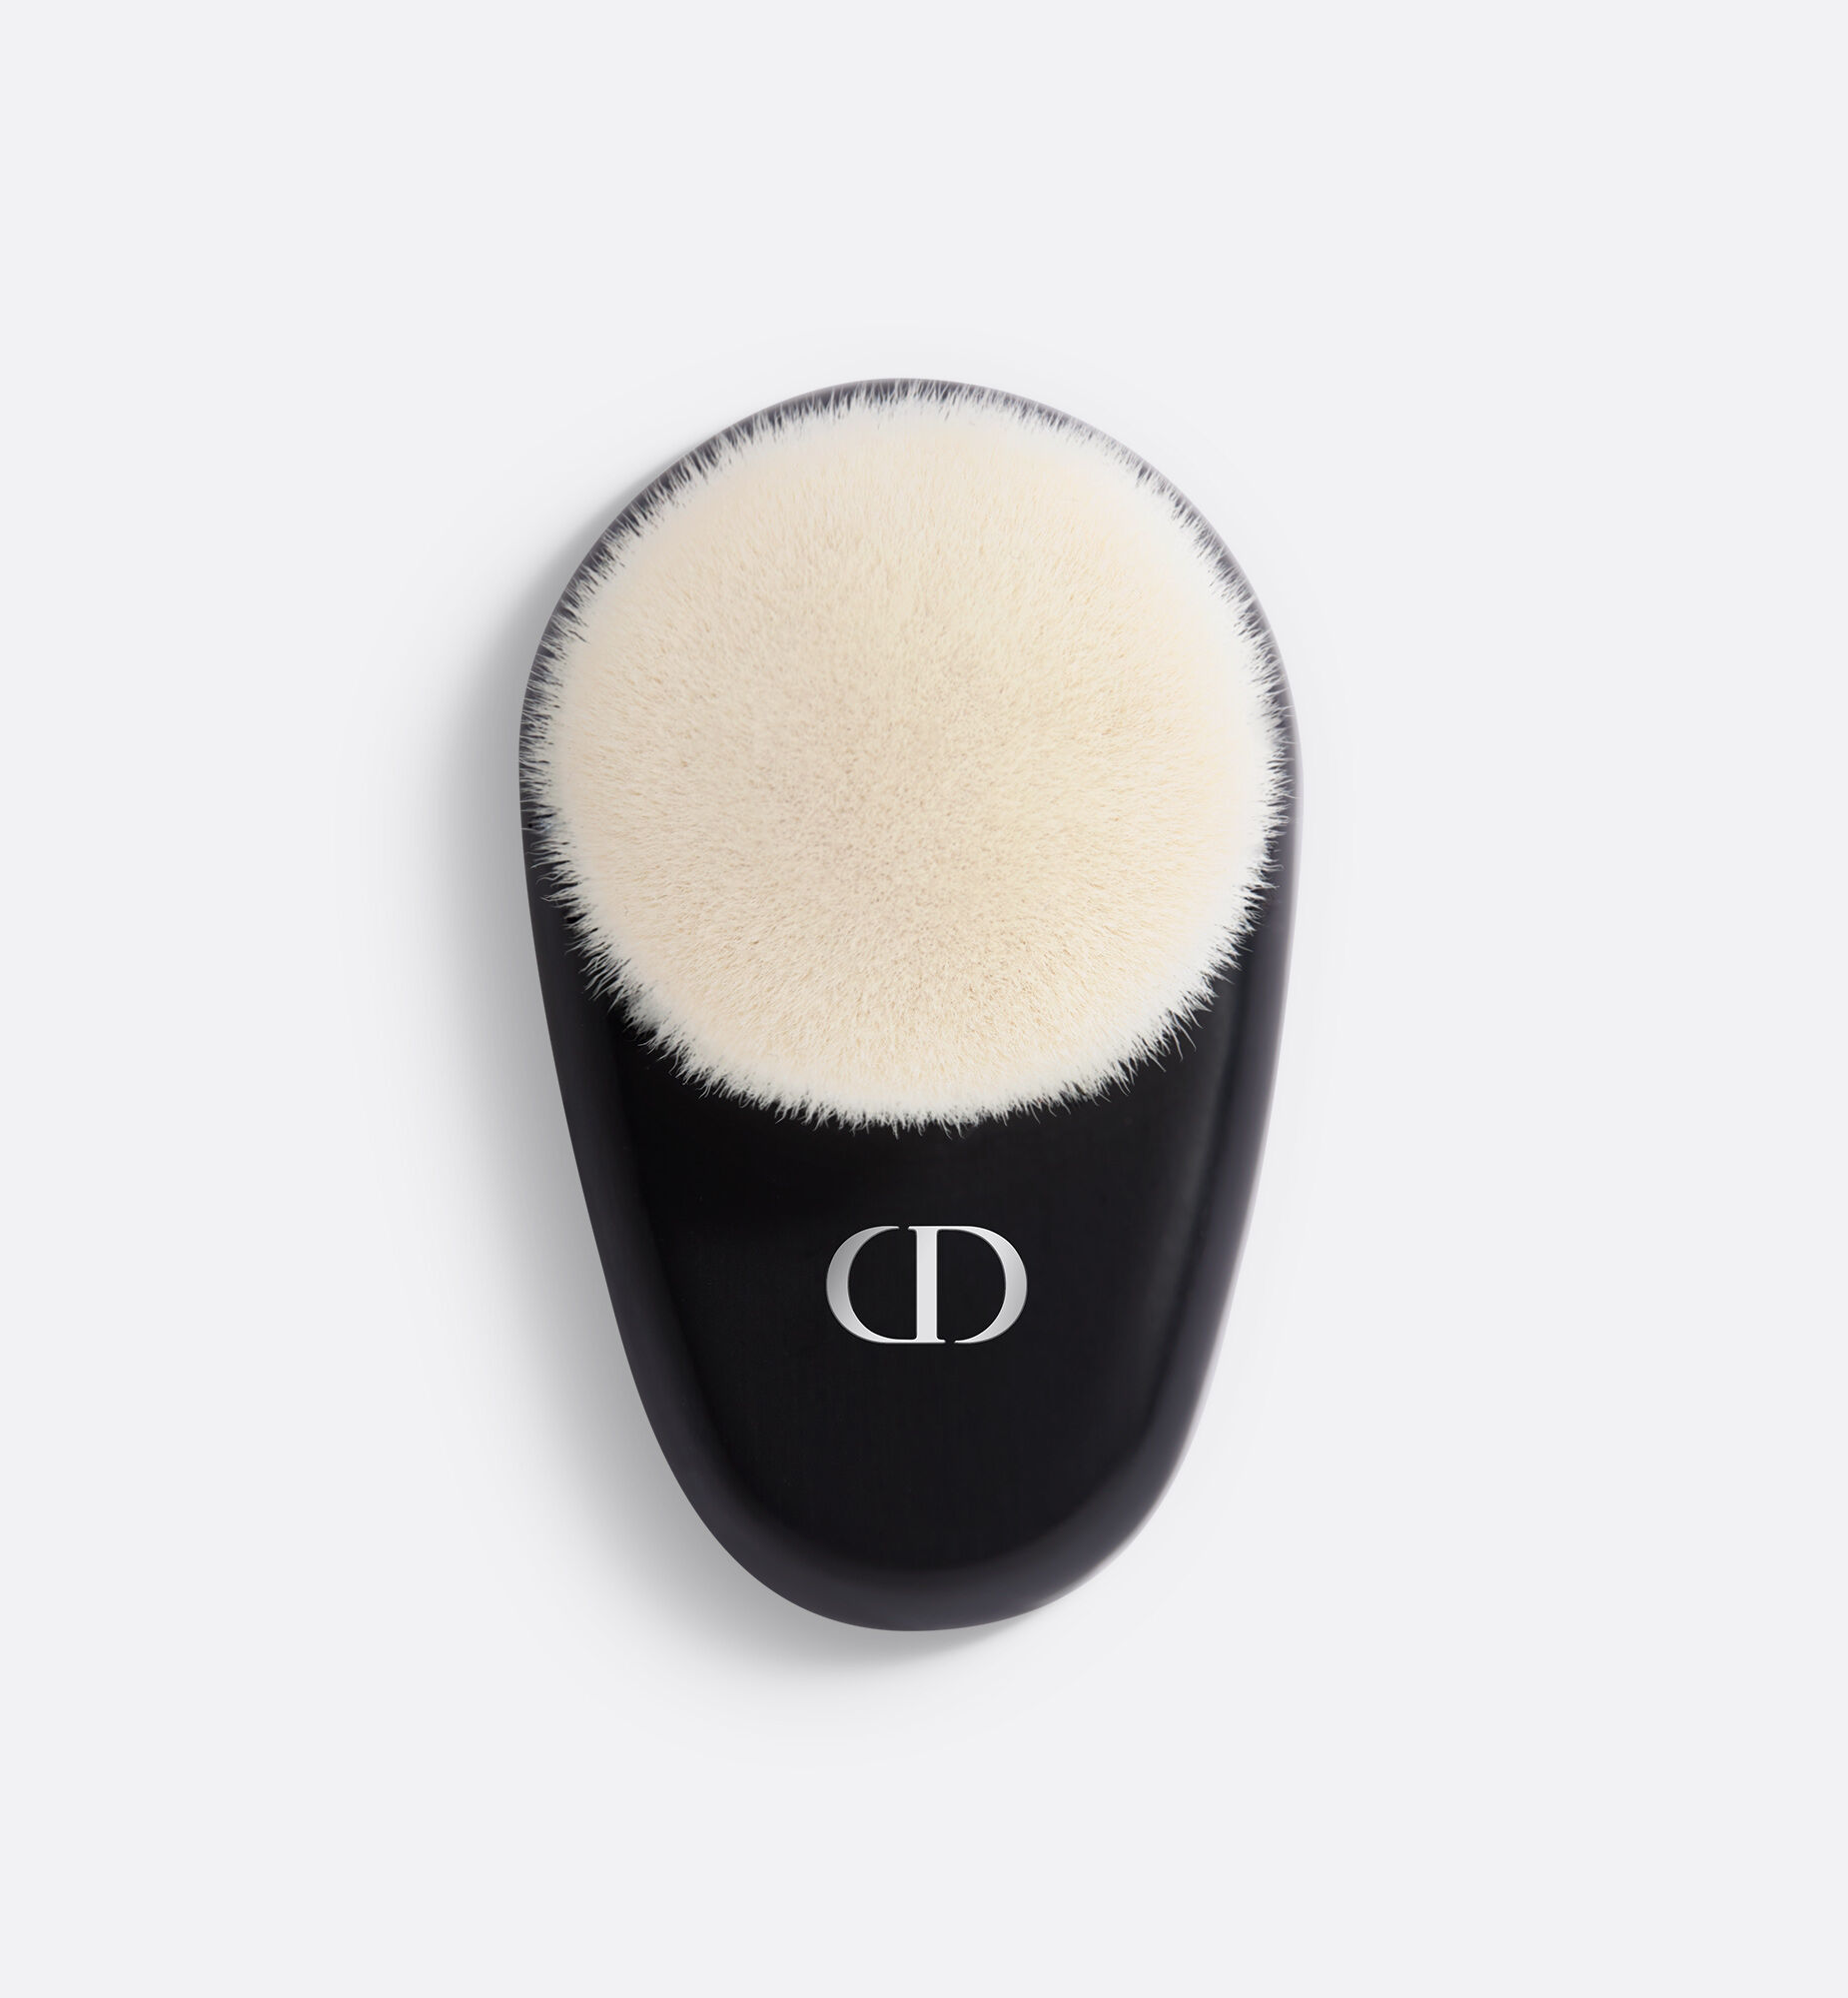 Backstage Face N°18 buildable coverage makeup brush | DIOR